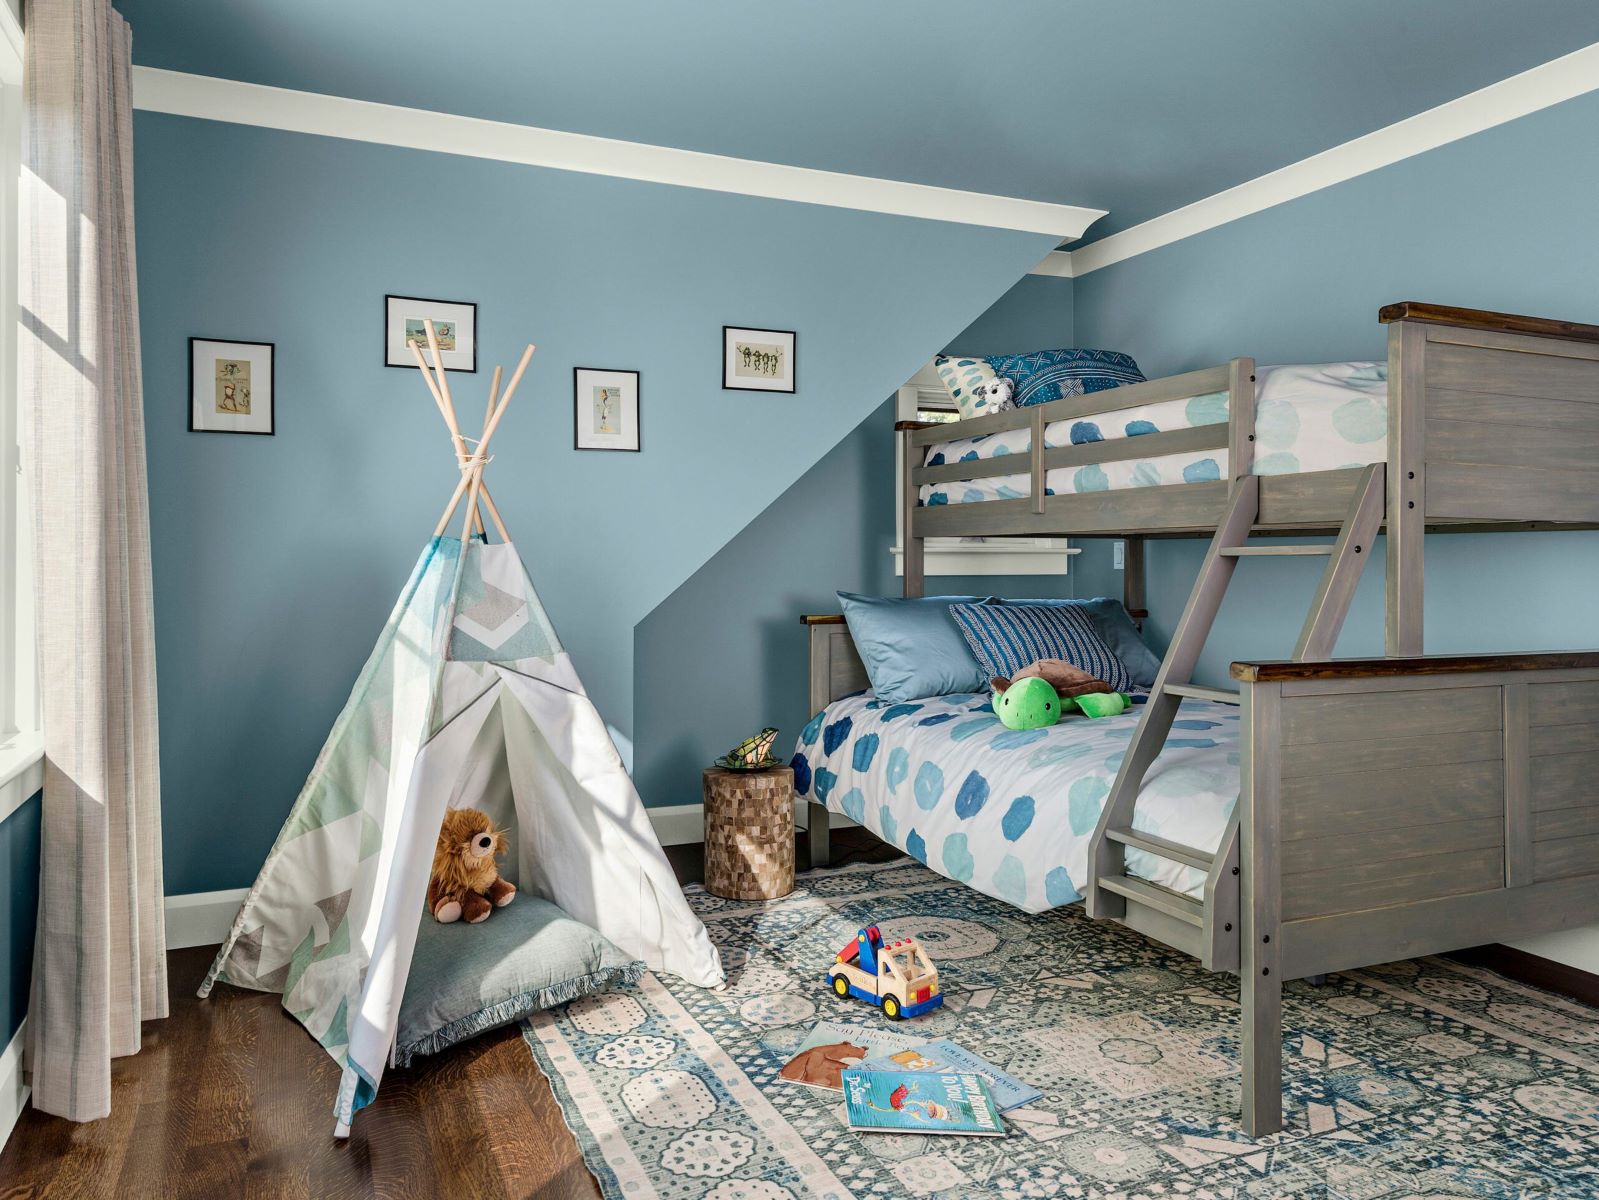 What To Do For Kids’ Room Decoration